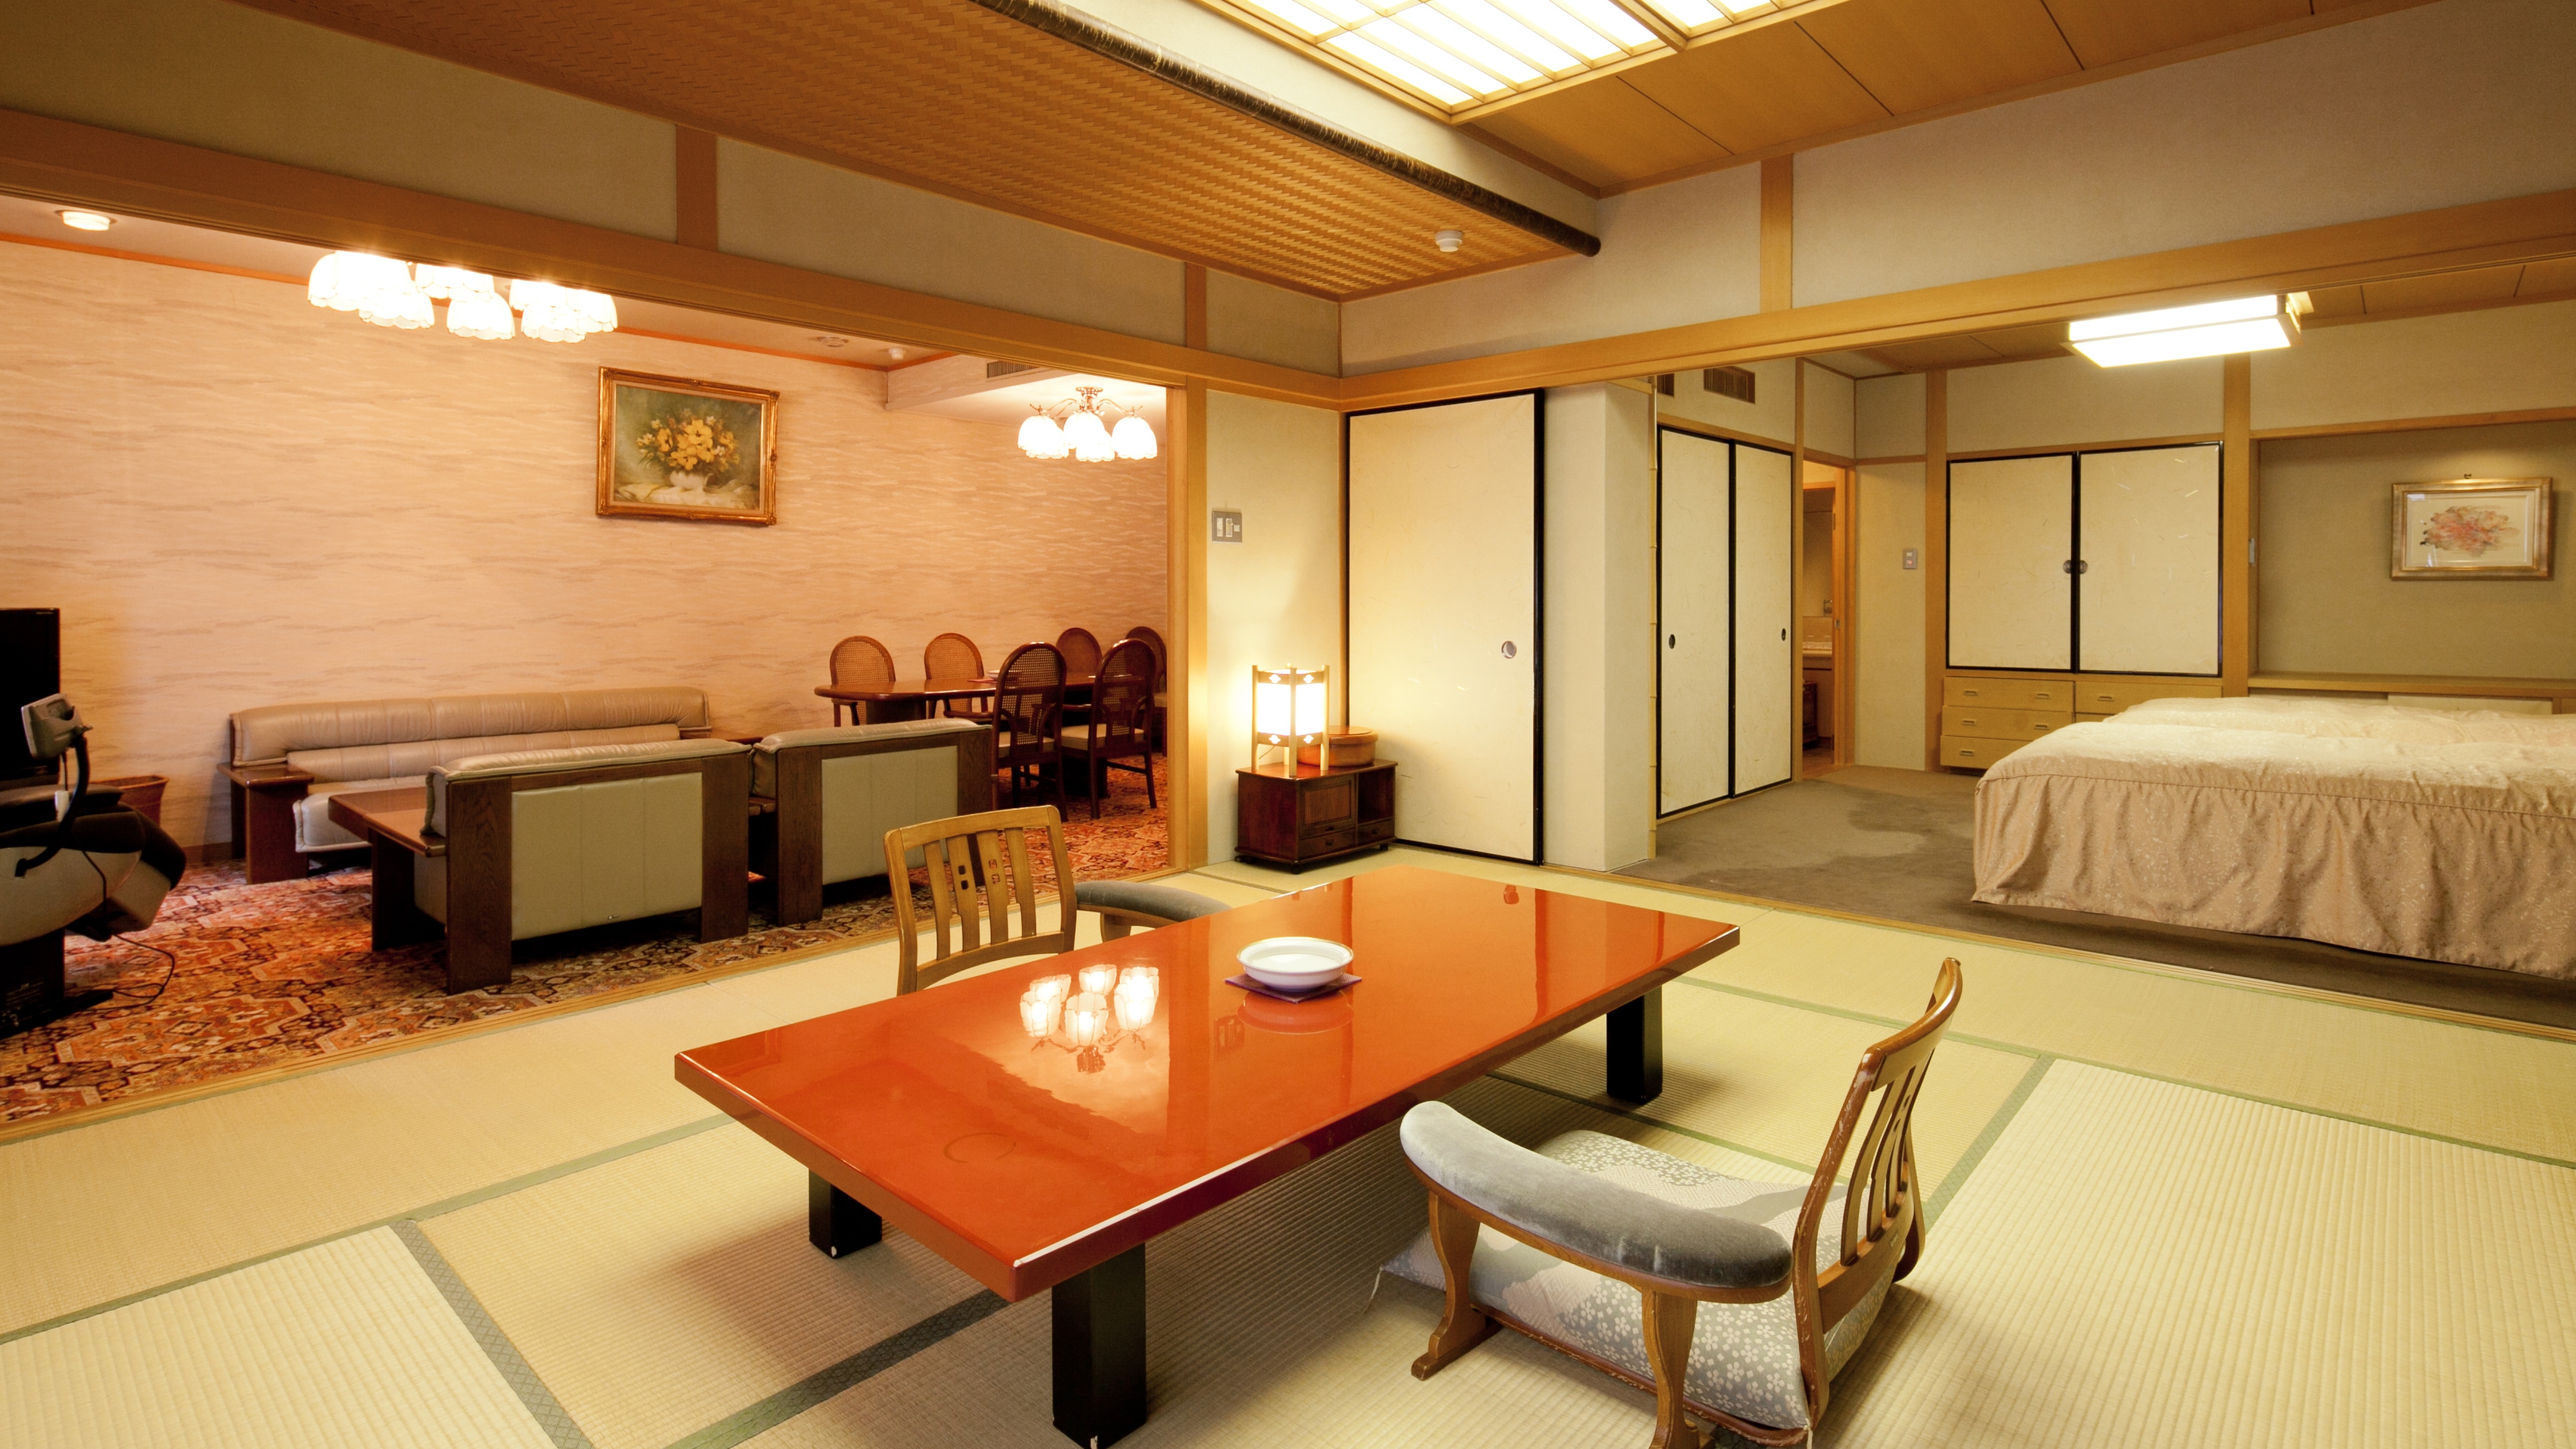 With open-air bath ◆ VIP room Gokusuitei-Kiritsubo- ◆ Japanese-Western style room (10 tatami mats) and Western-style room (8.16 tatami mats).